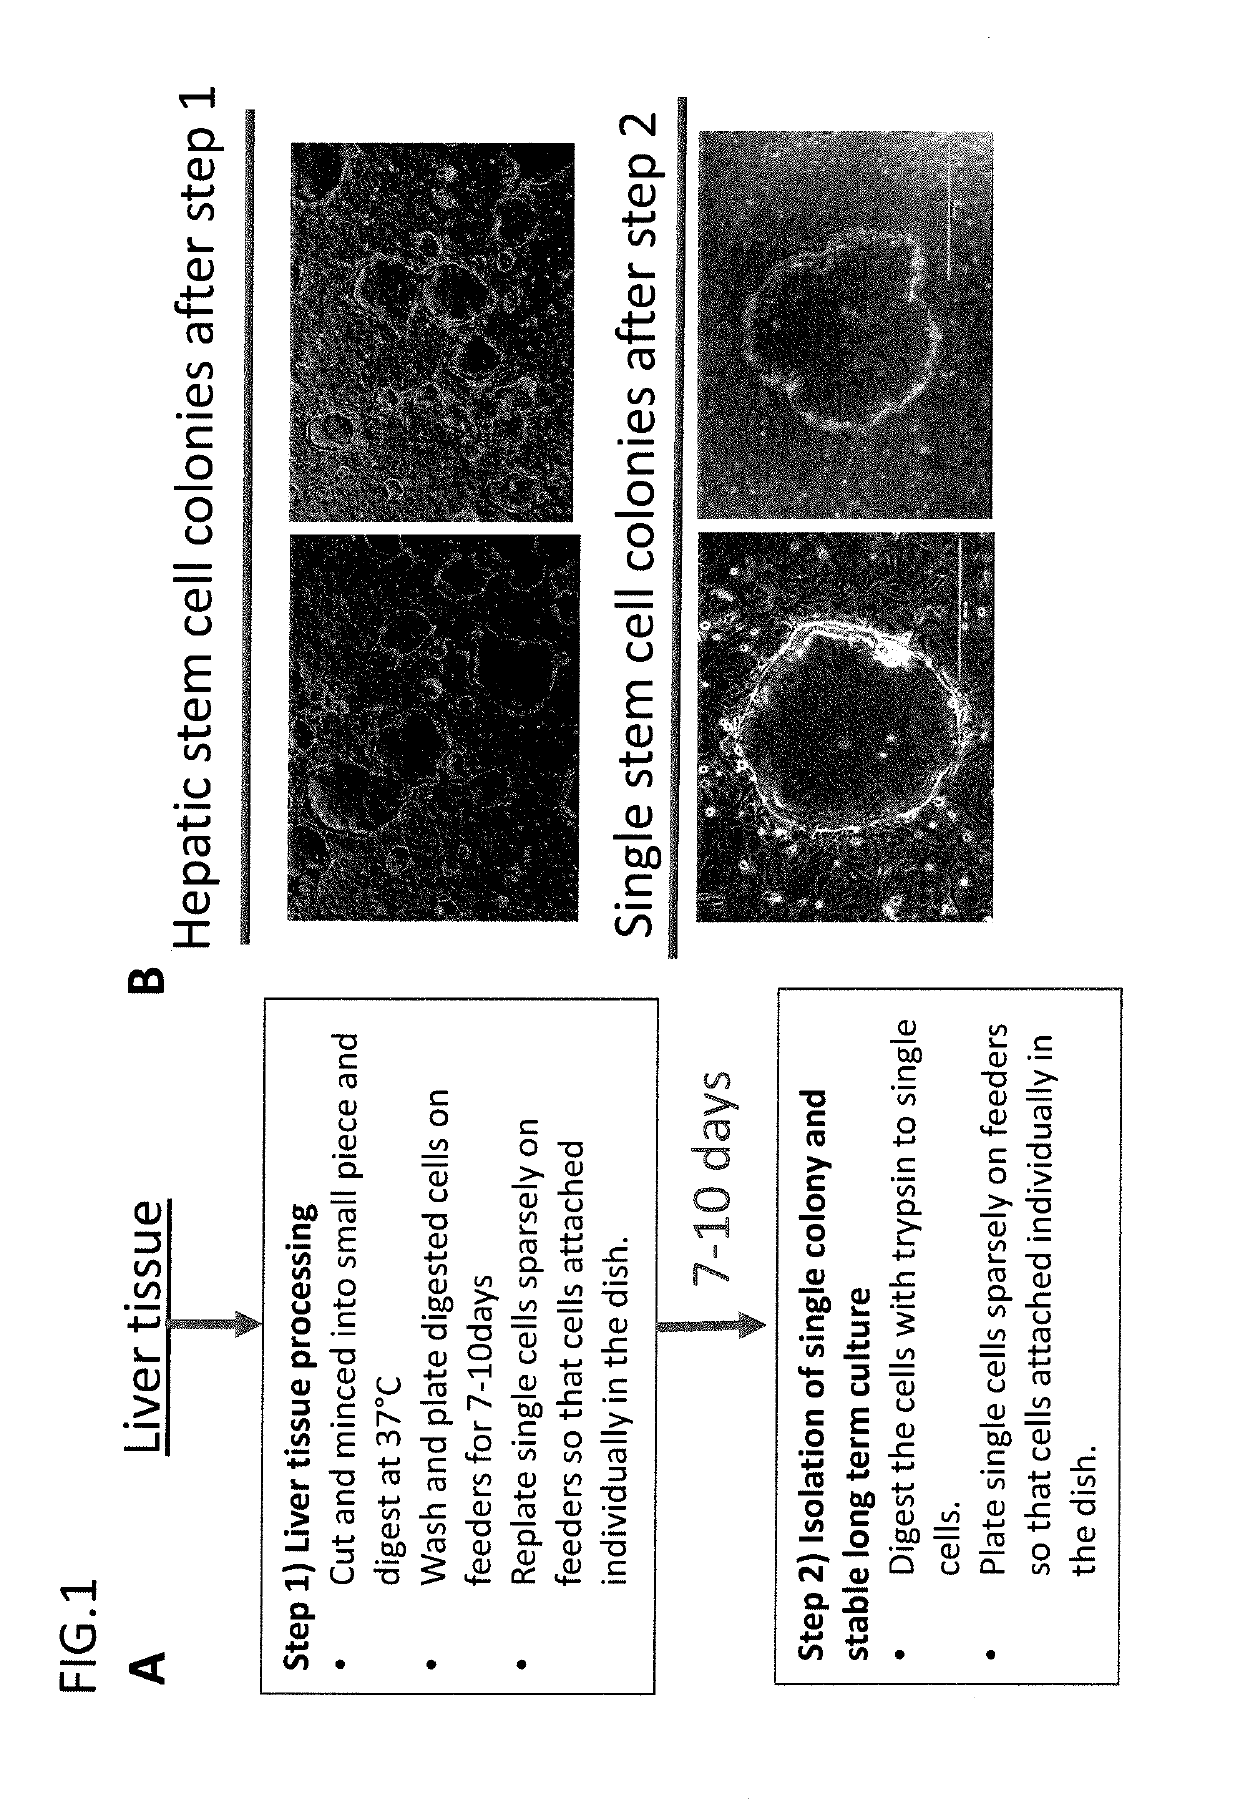 Derivation of hepatic stem cells and mature liver cell types and uses thereof